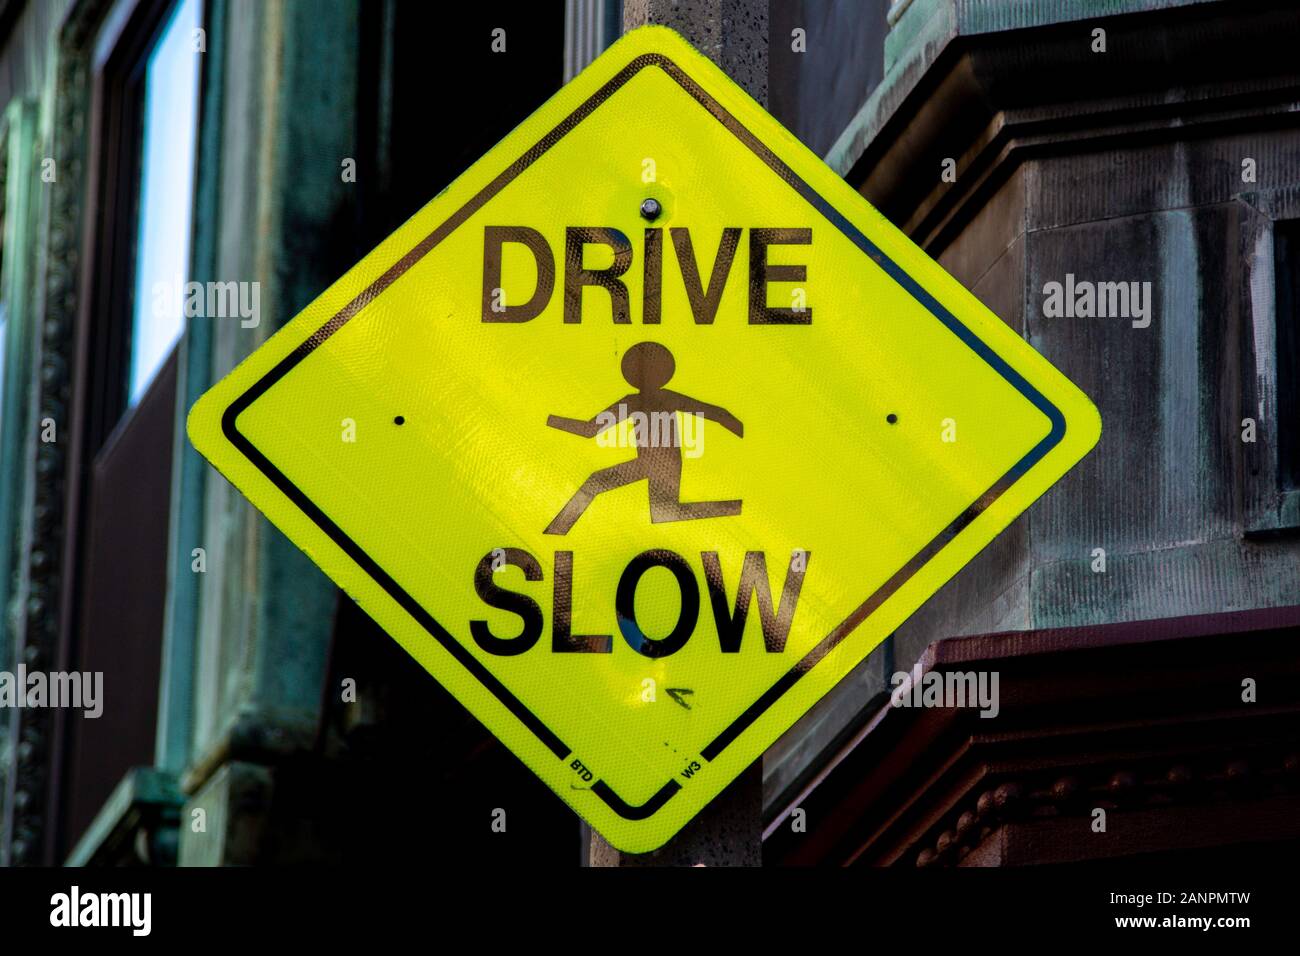 Drive slow sign in Boston Stock Photo